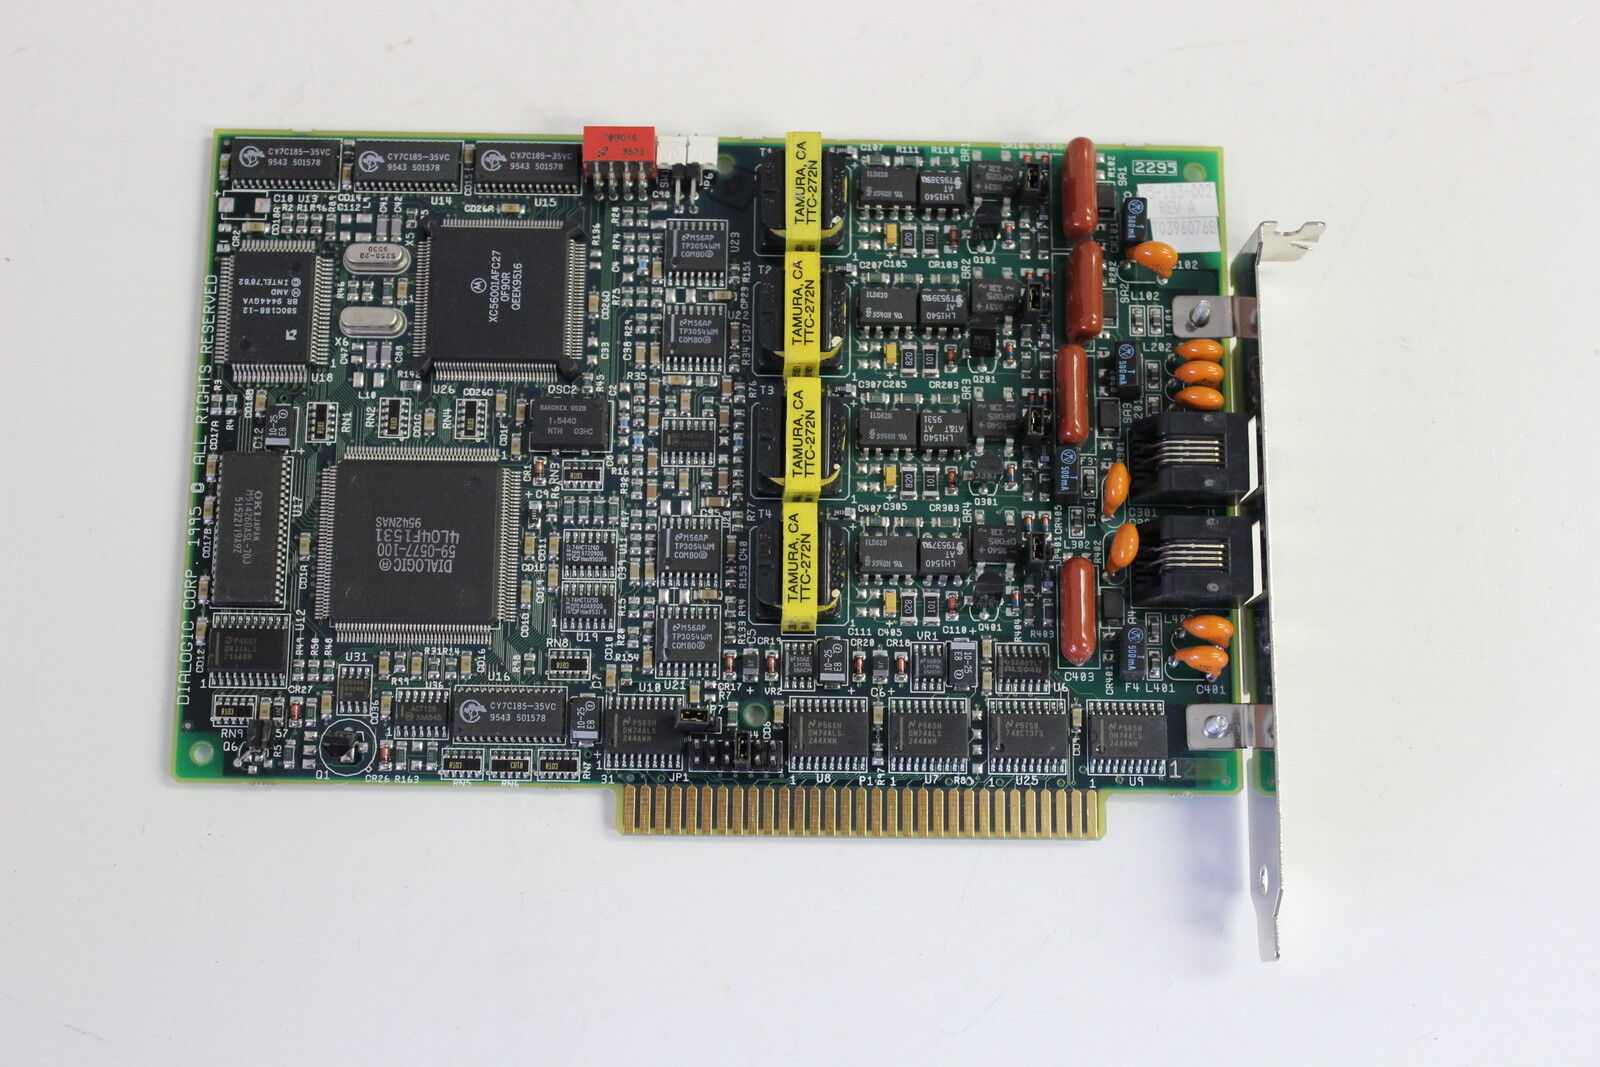 DIALOGIC D/41DHS ISA 4 PORT VOICE BOARD 85-163-002 04-0767-001 WITH WARRANTY